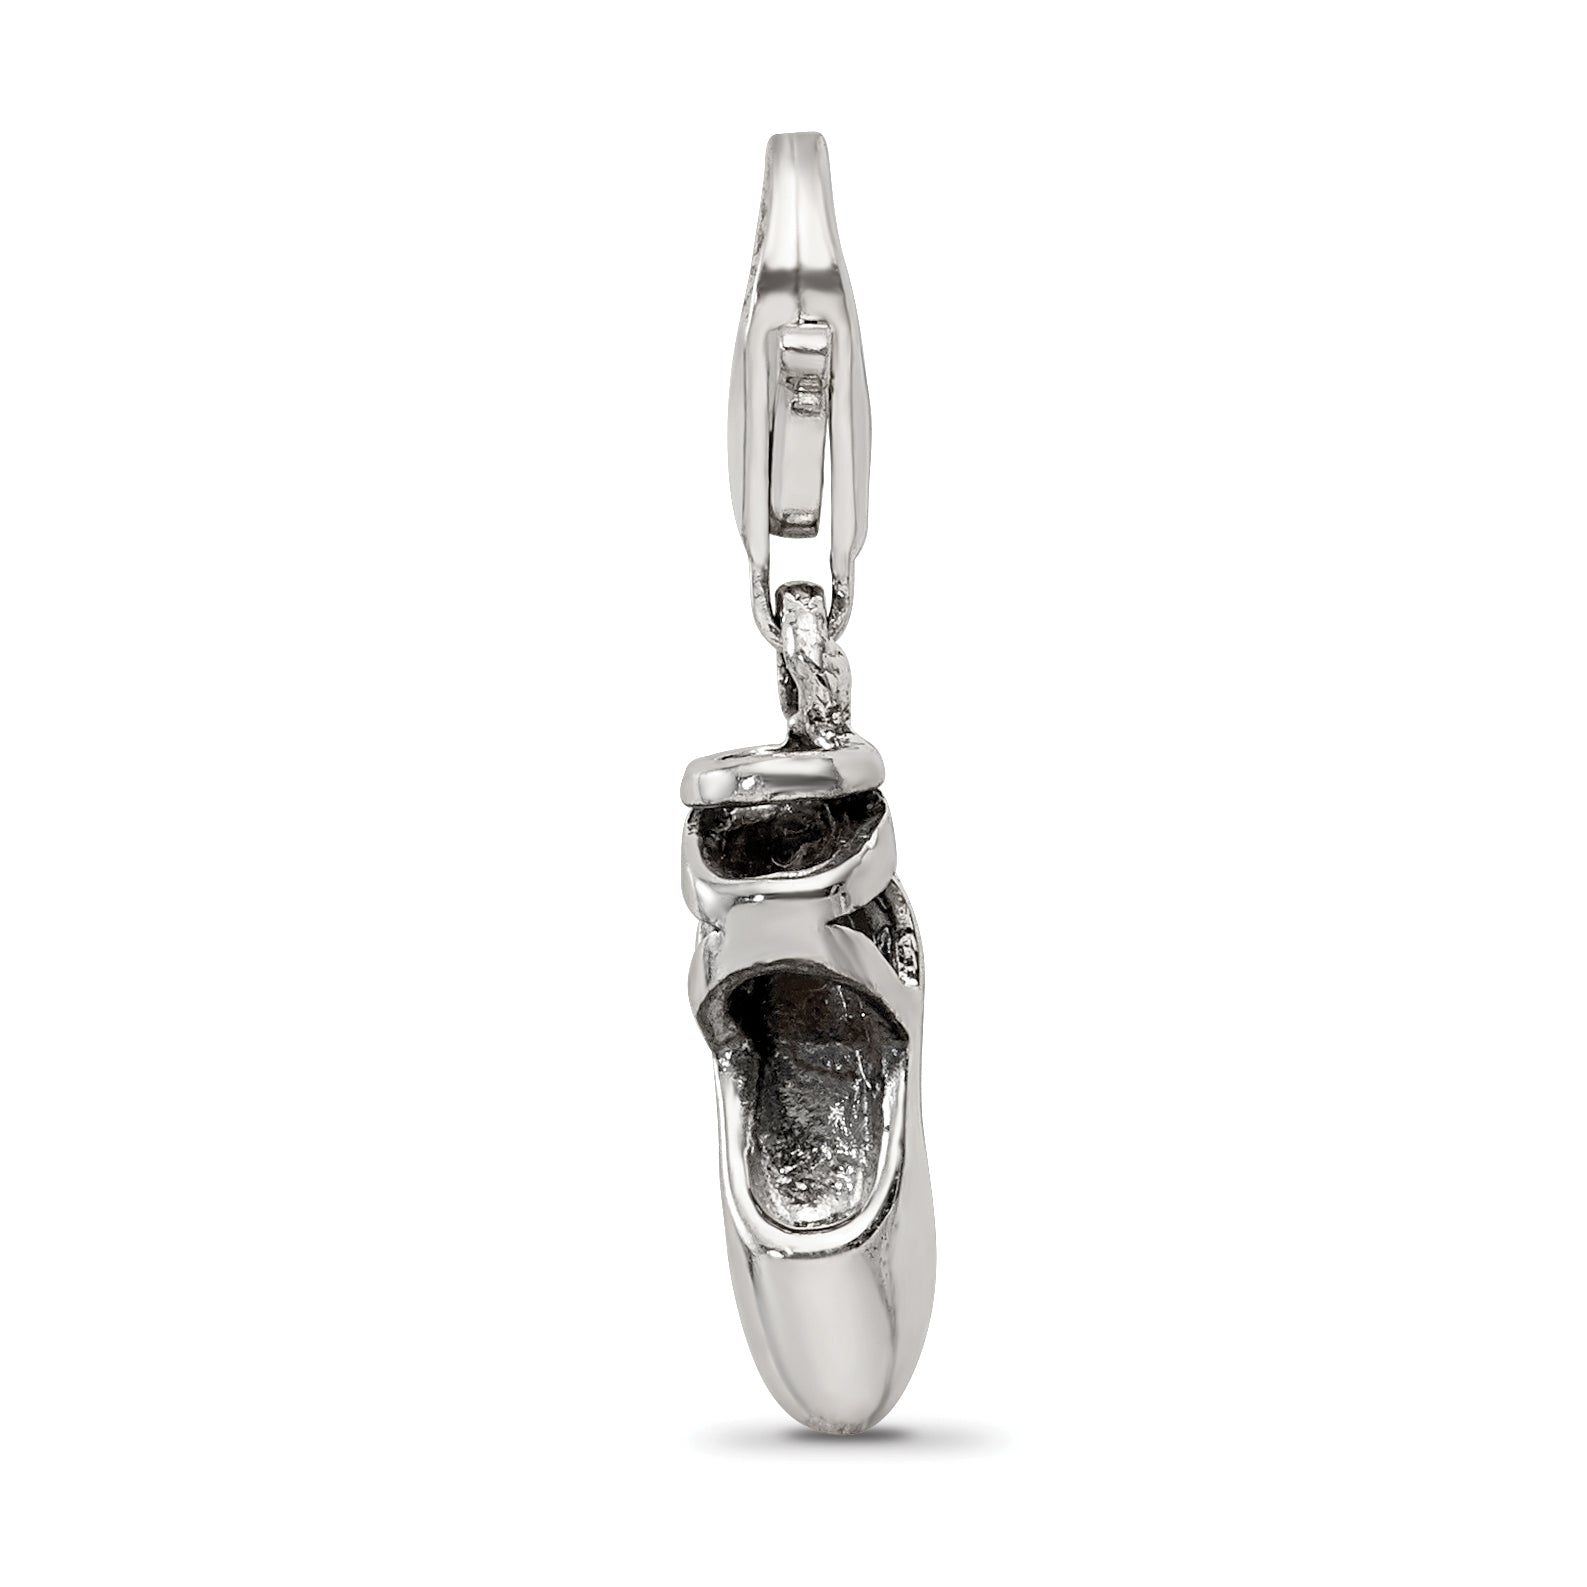 Sterling Silver Reflections Ballet Slipper Click-on for Bead